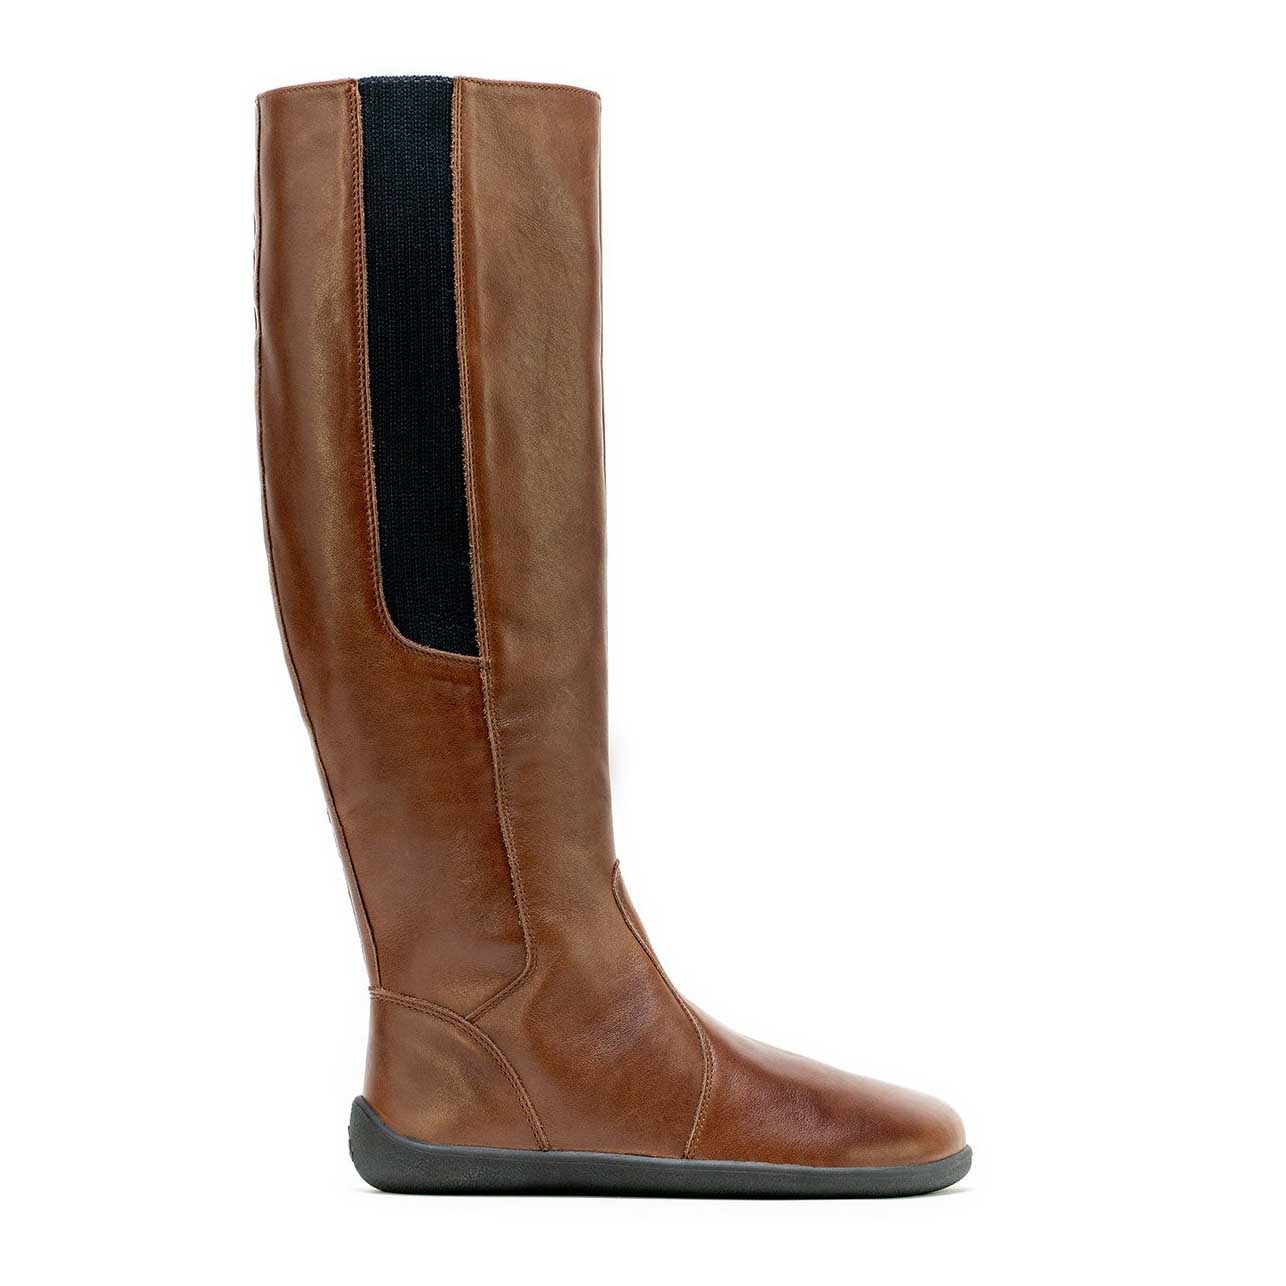 A photo of Belenka Sierra made from smooth leather, fleece, and rubber soles. The boots are brown in color with a tall riding boot elastic paneled shaft lined with fleece. One boot is shown from the right side against a white background. #color_dark-brown